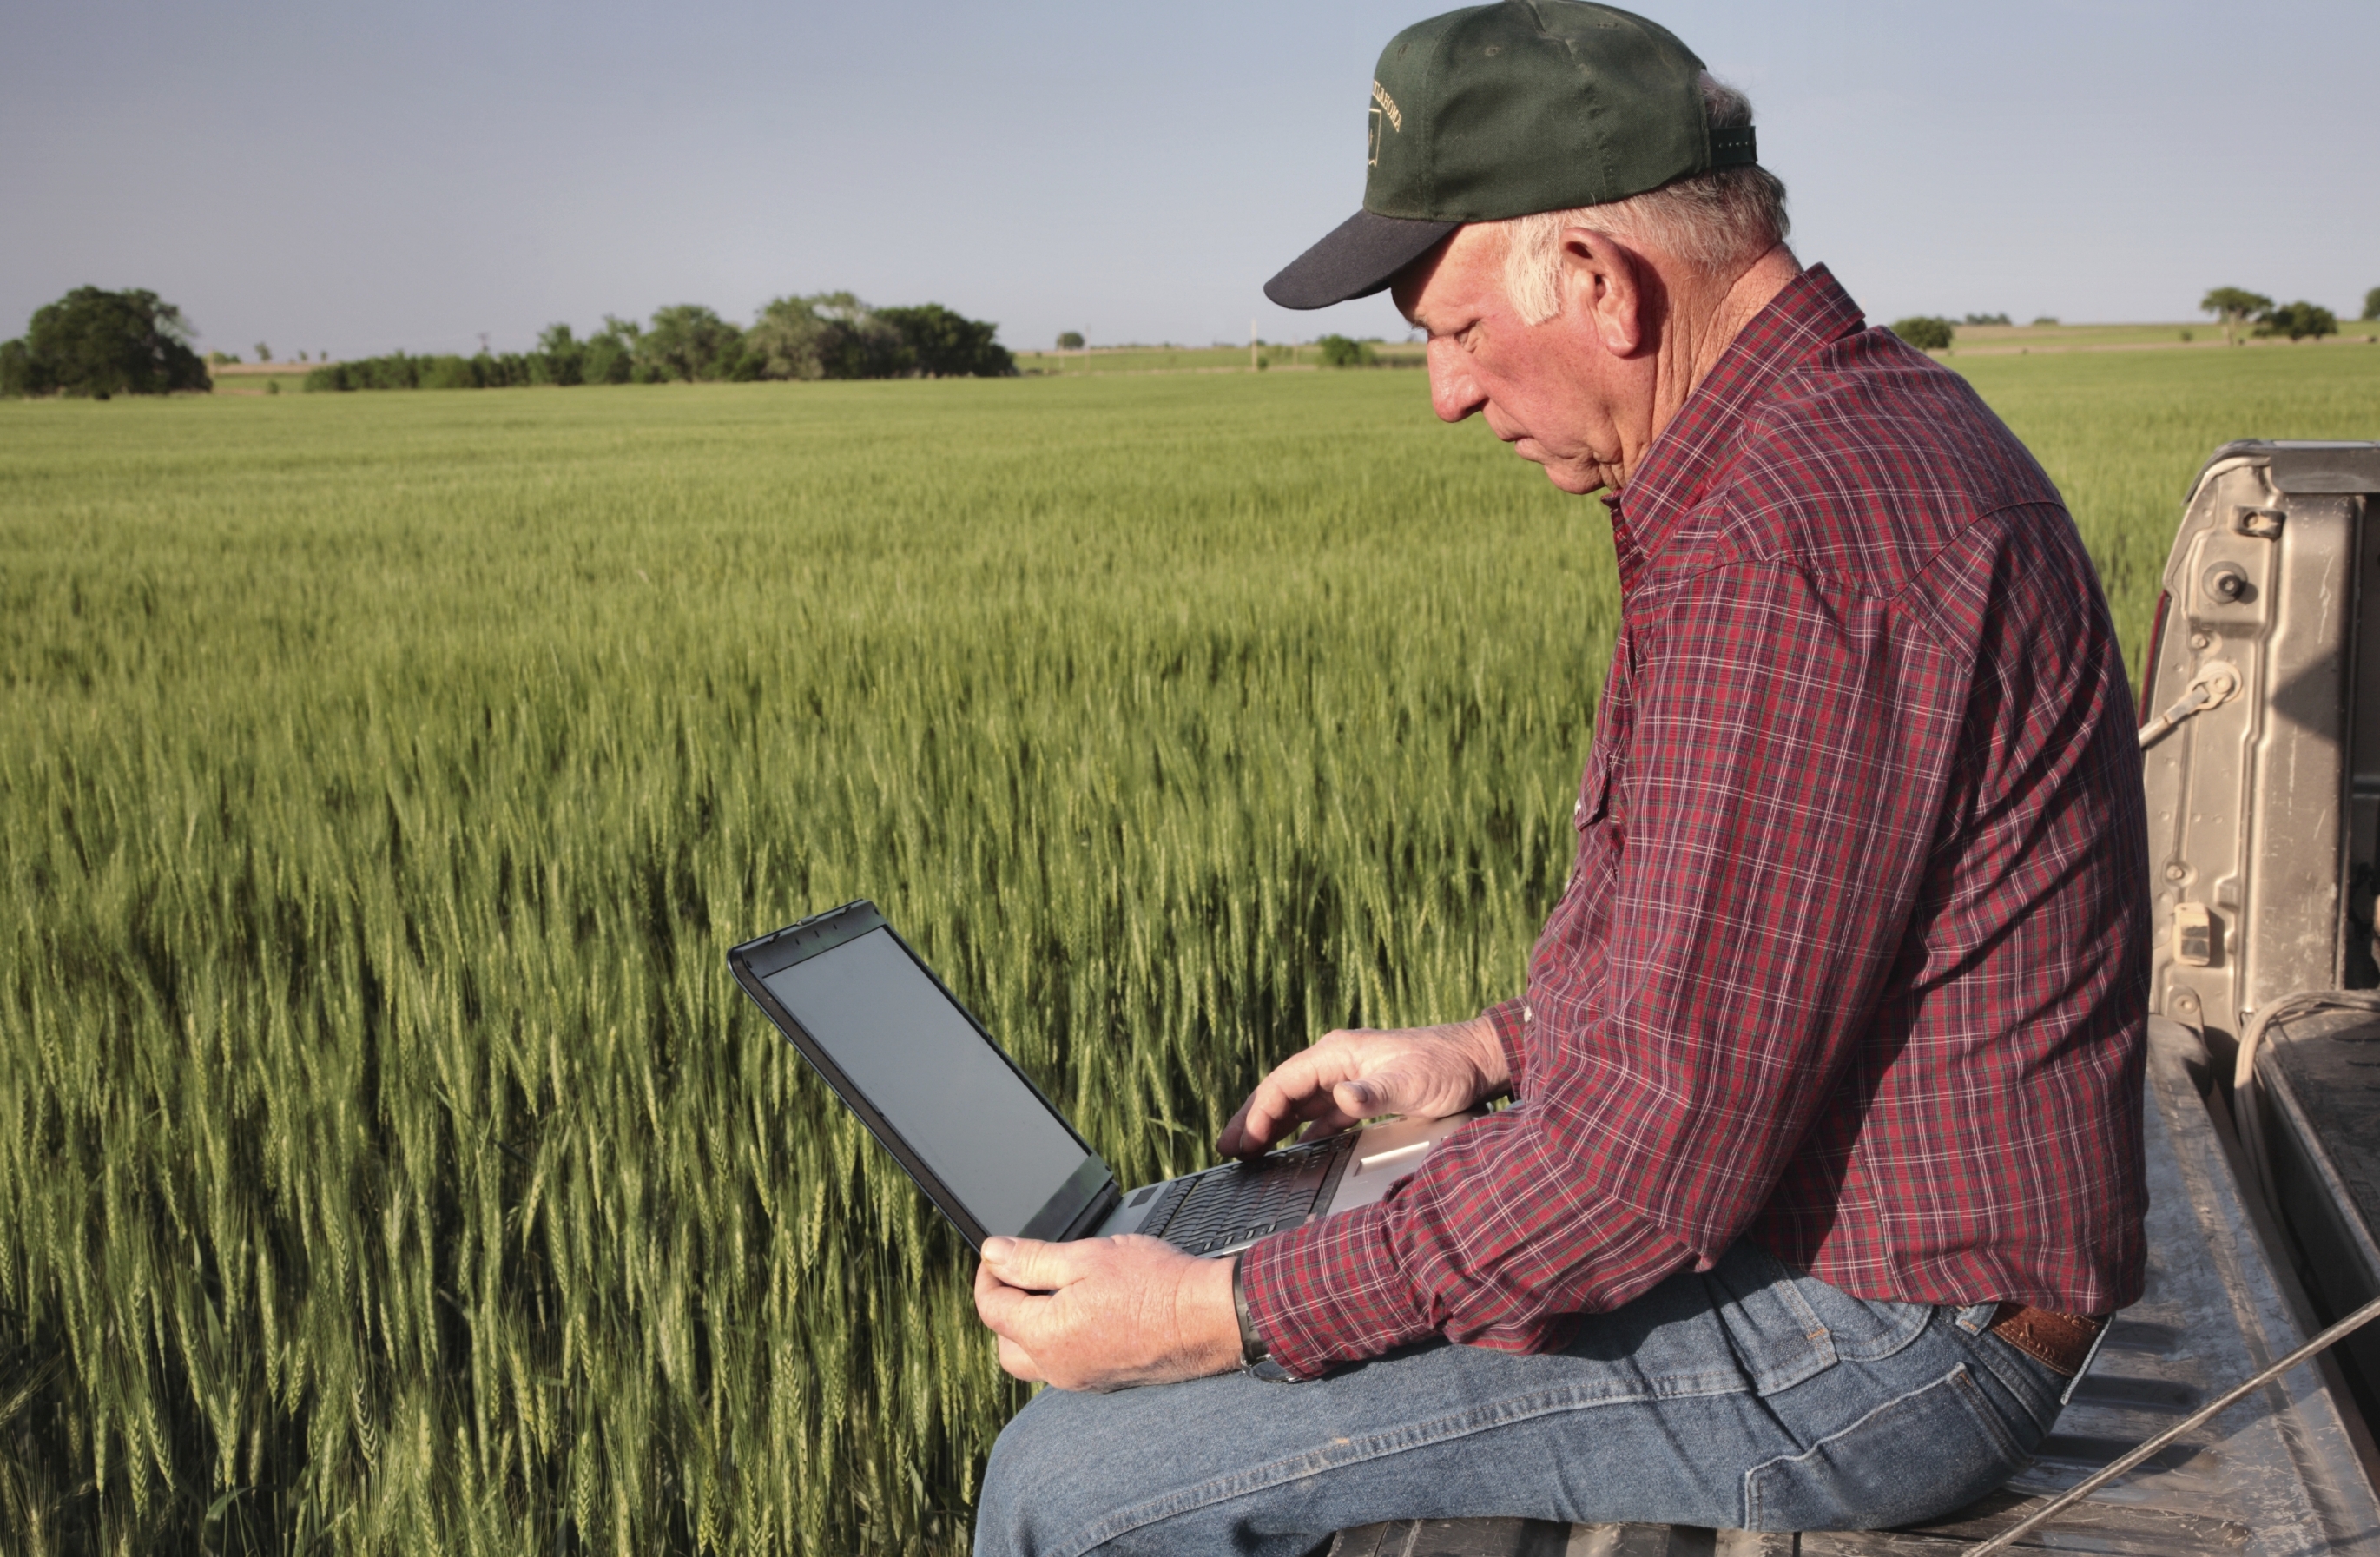 There will also be a number of farmers out there concerned about the quality of their internet connection